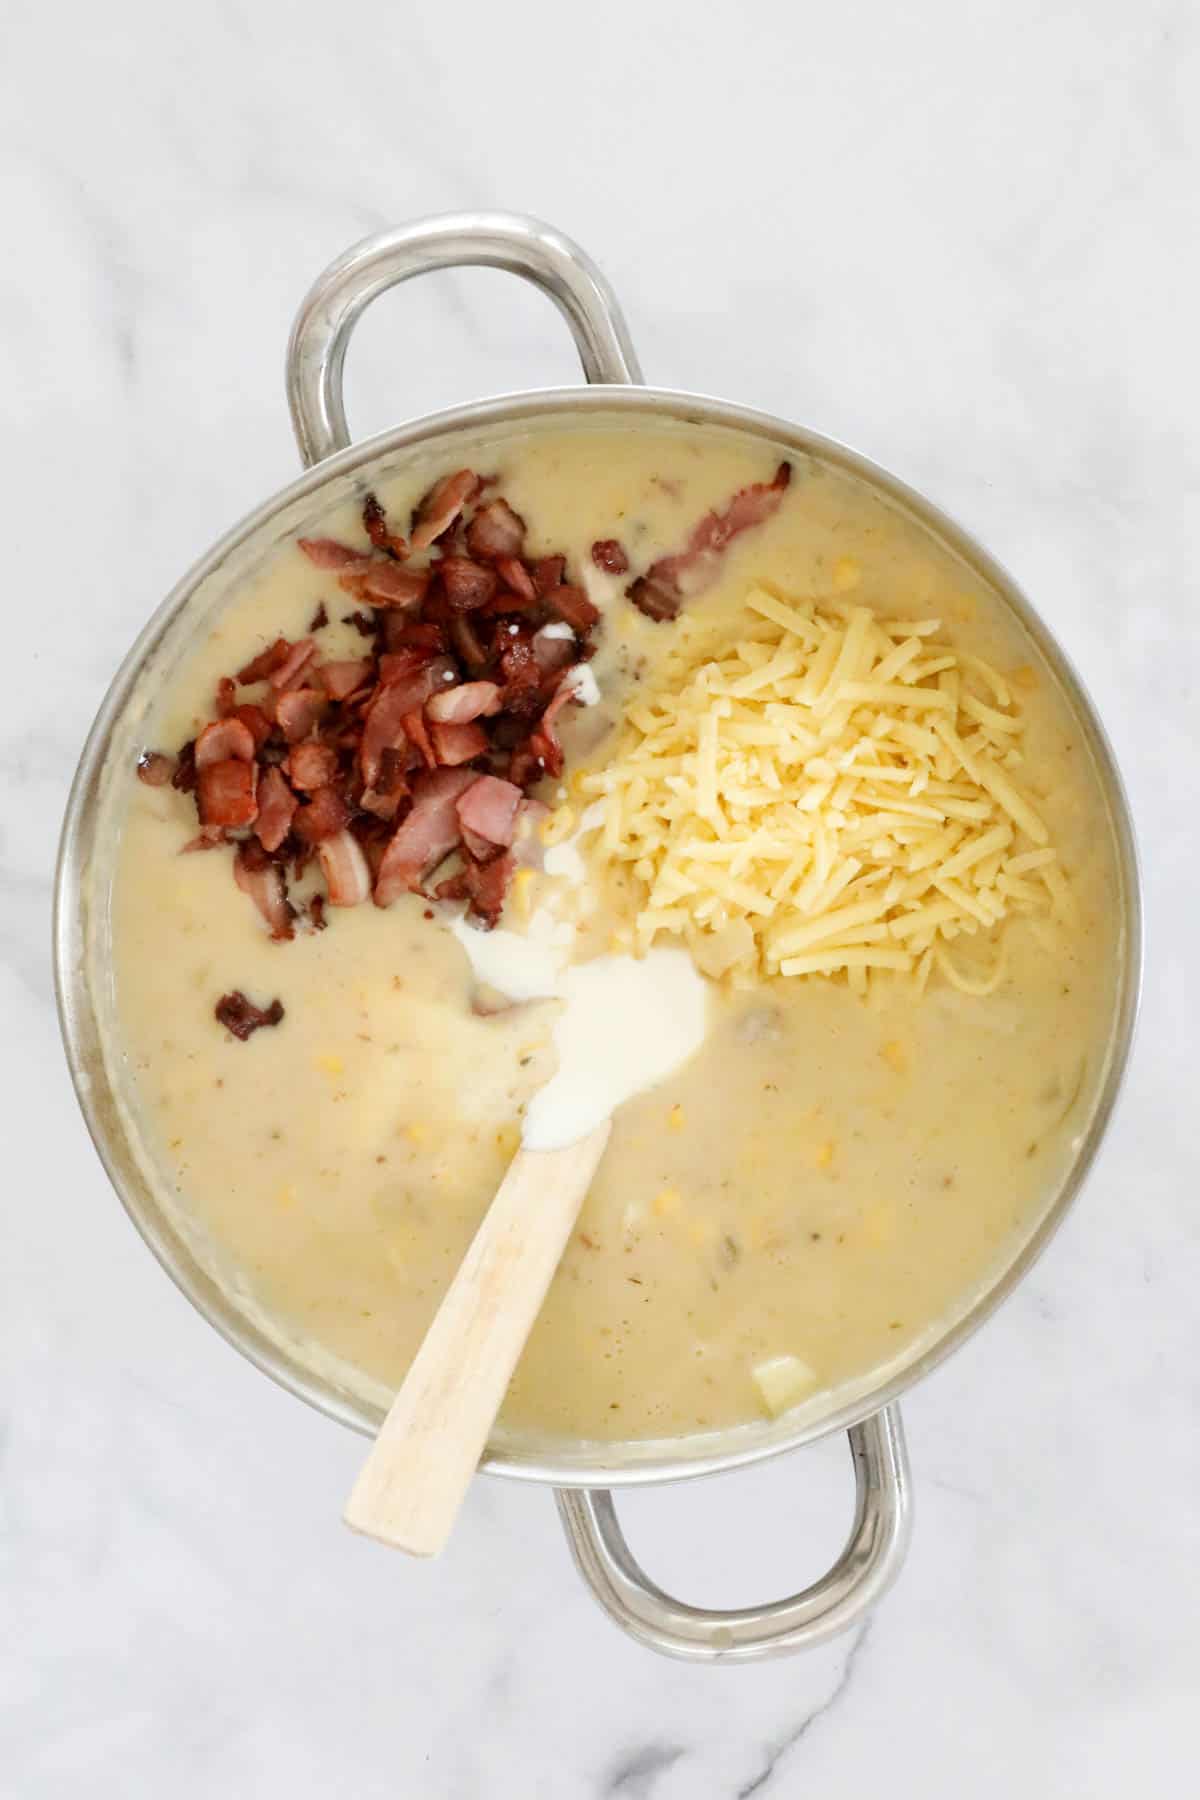 Grated cheese, crispy bacon and cream added to the soup.